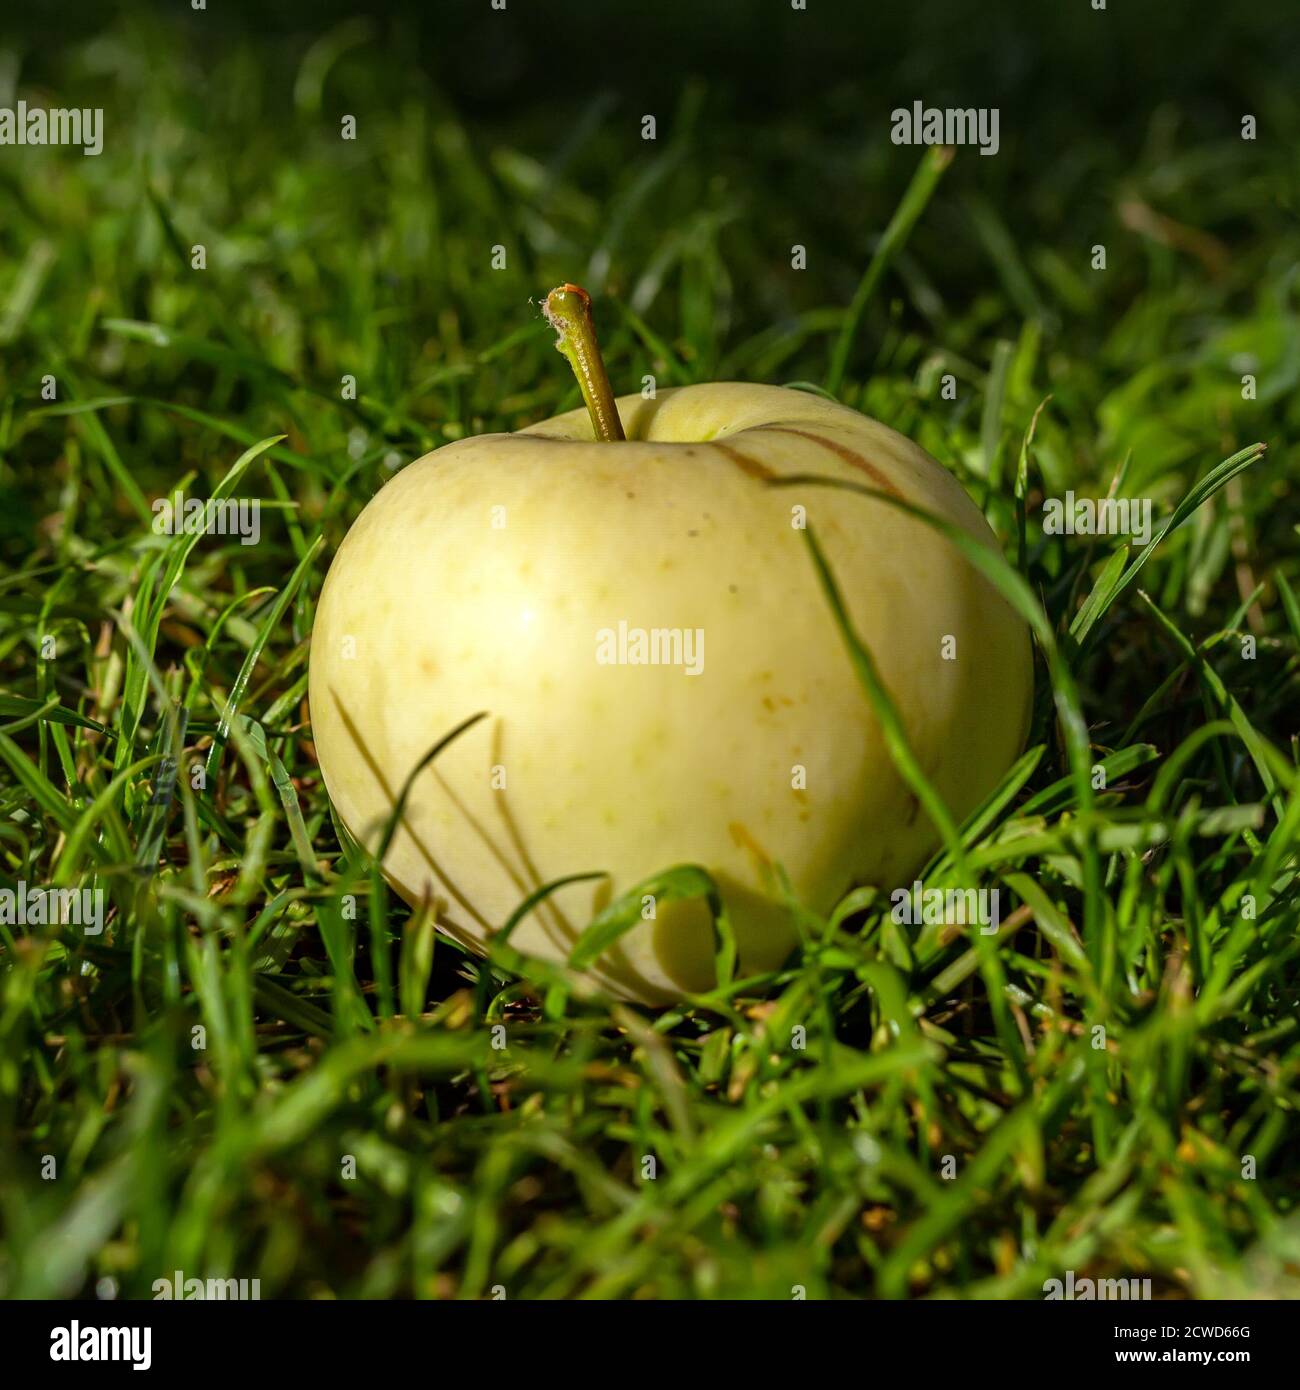 Harvest autumn. Yellow apple on green grass close-up. Square image. Stock Photo